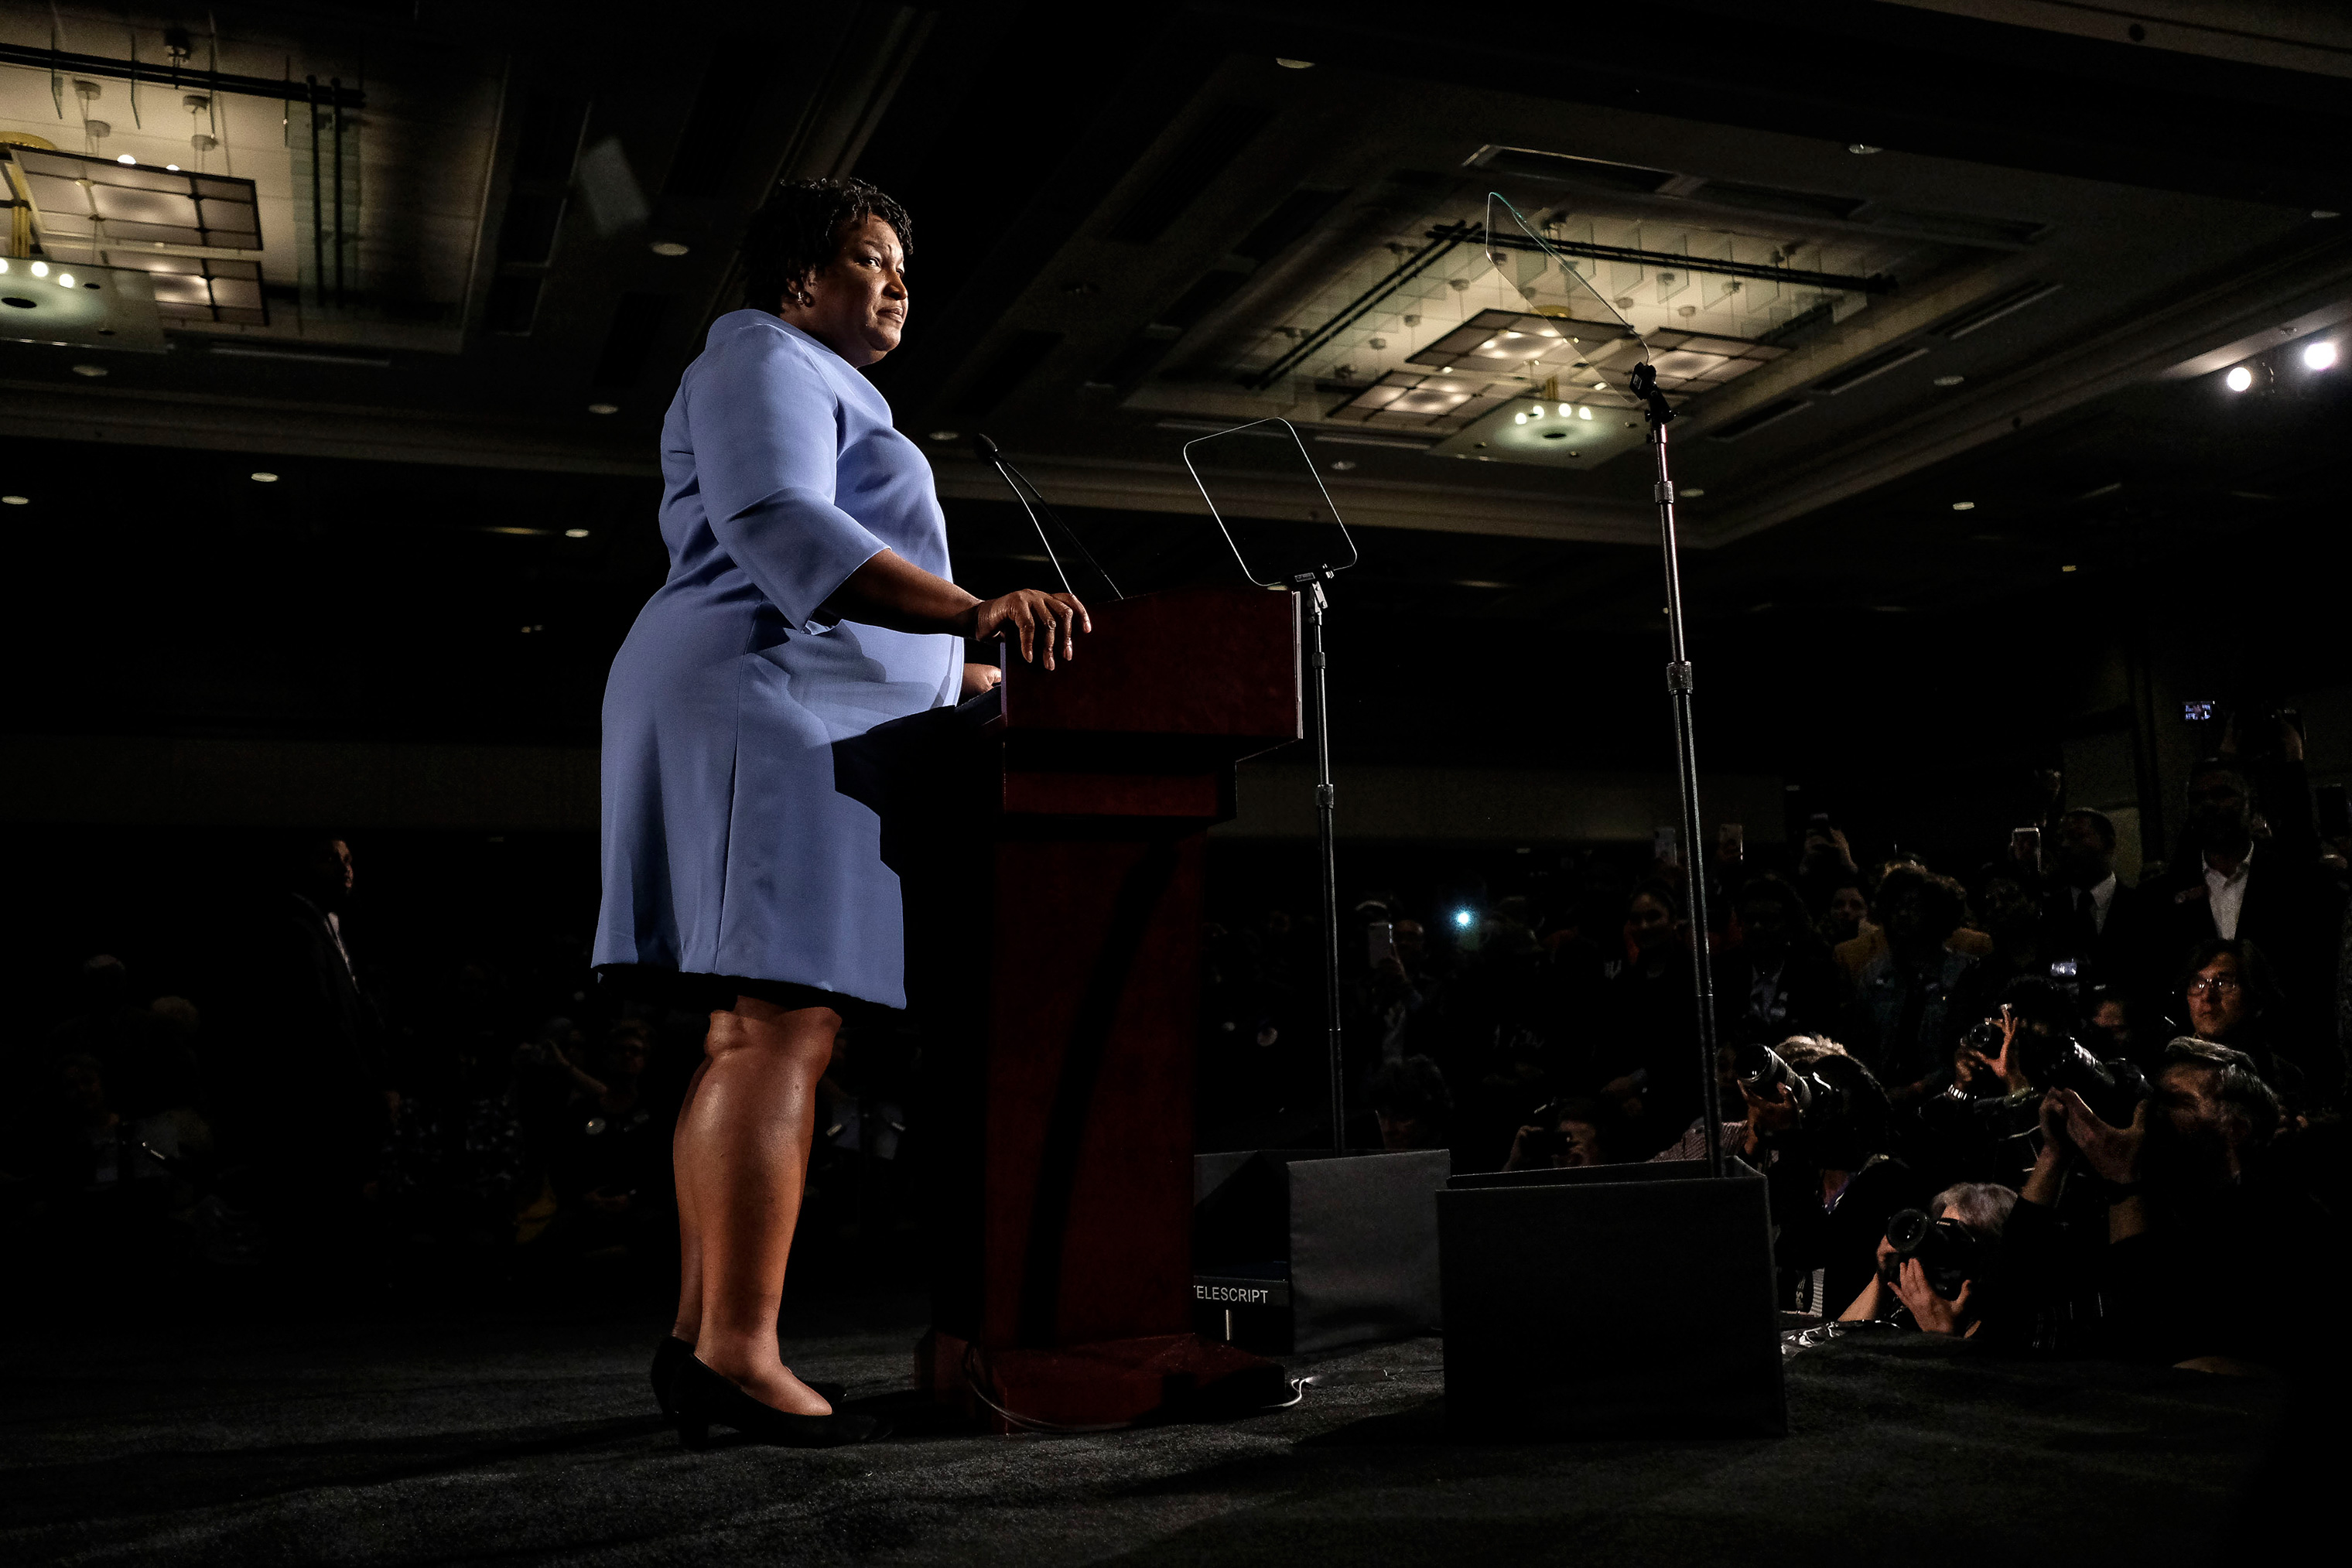 Democratic gubernatorial candidate Stacey Abrams speaks during the election night watch party at the Hyatt Regency hotel in Atlanta, Ga. (Gabriella Demczuk for TIME)